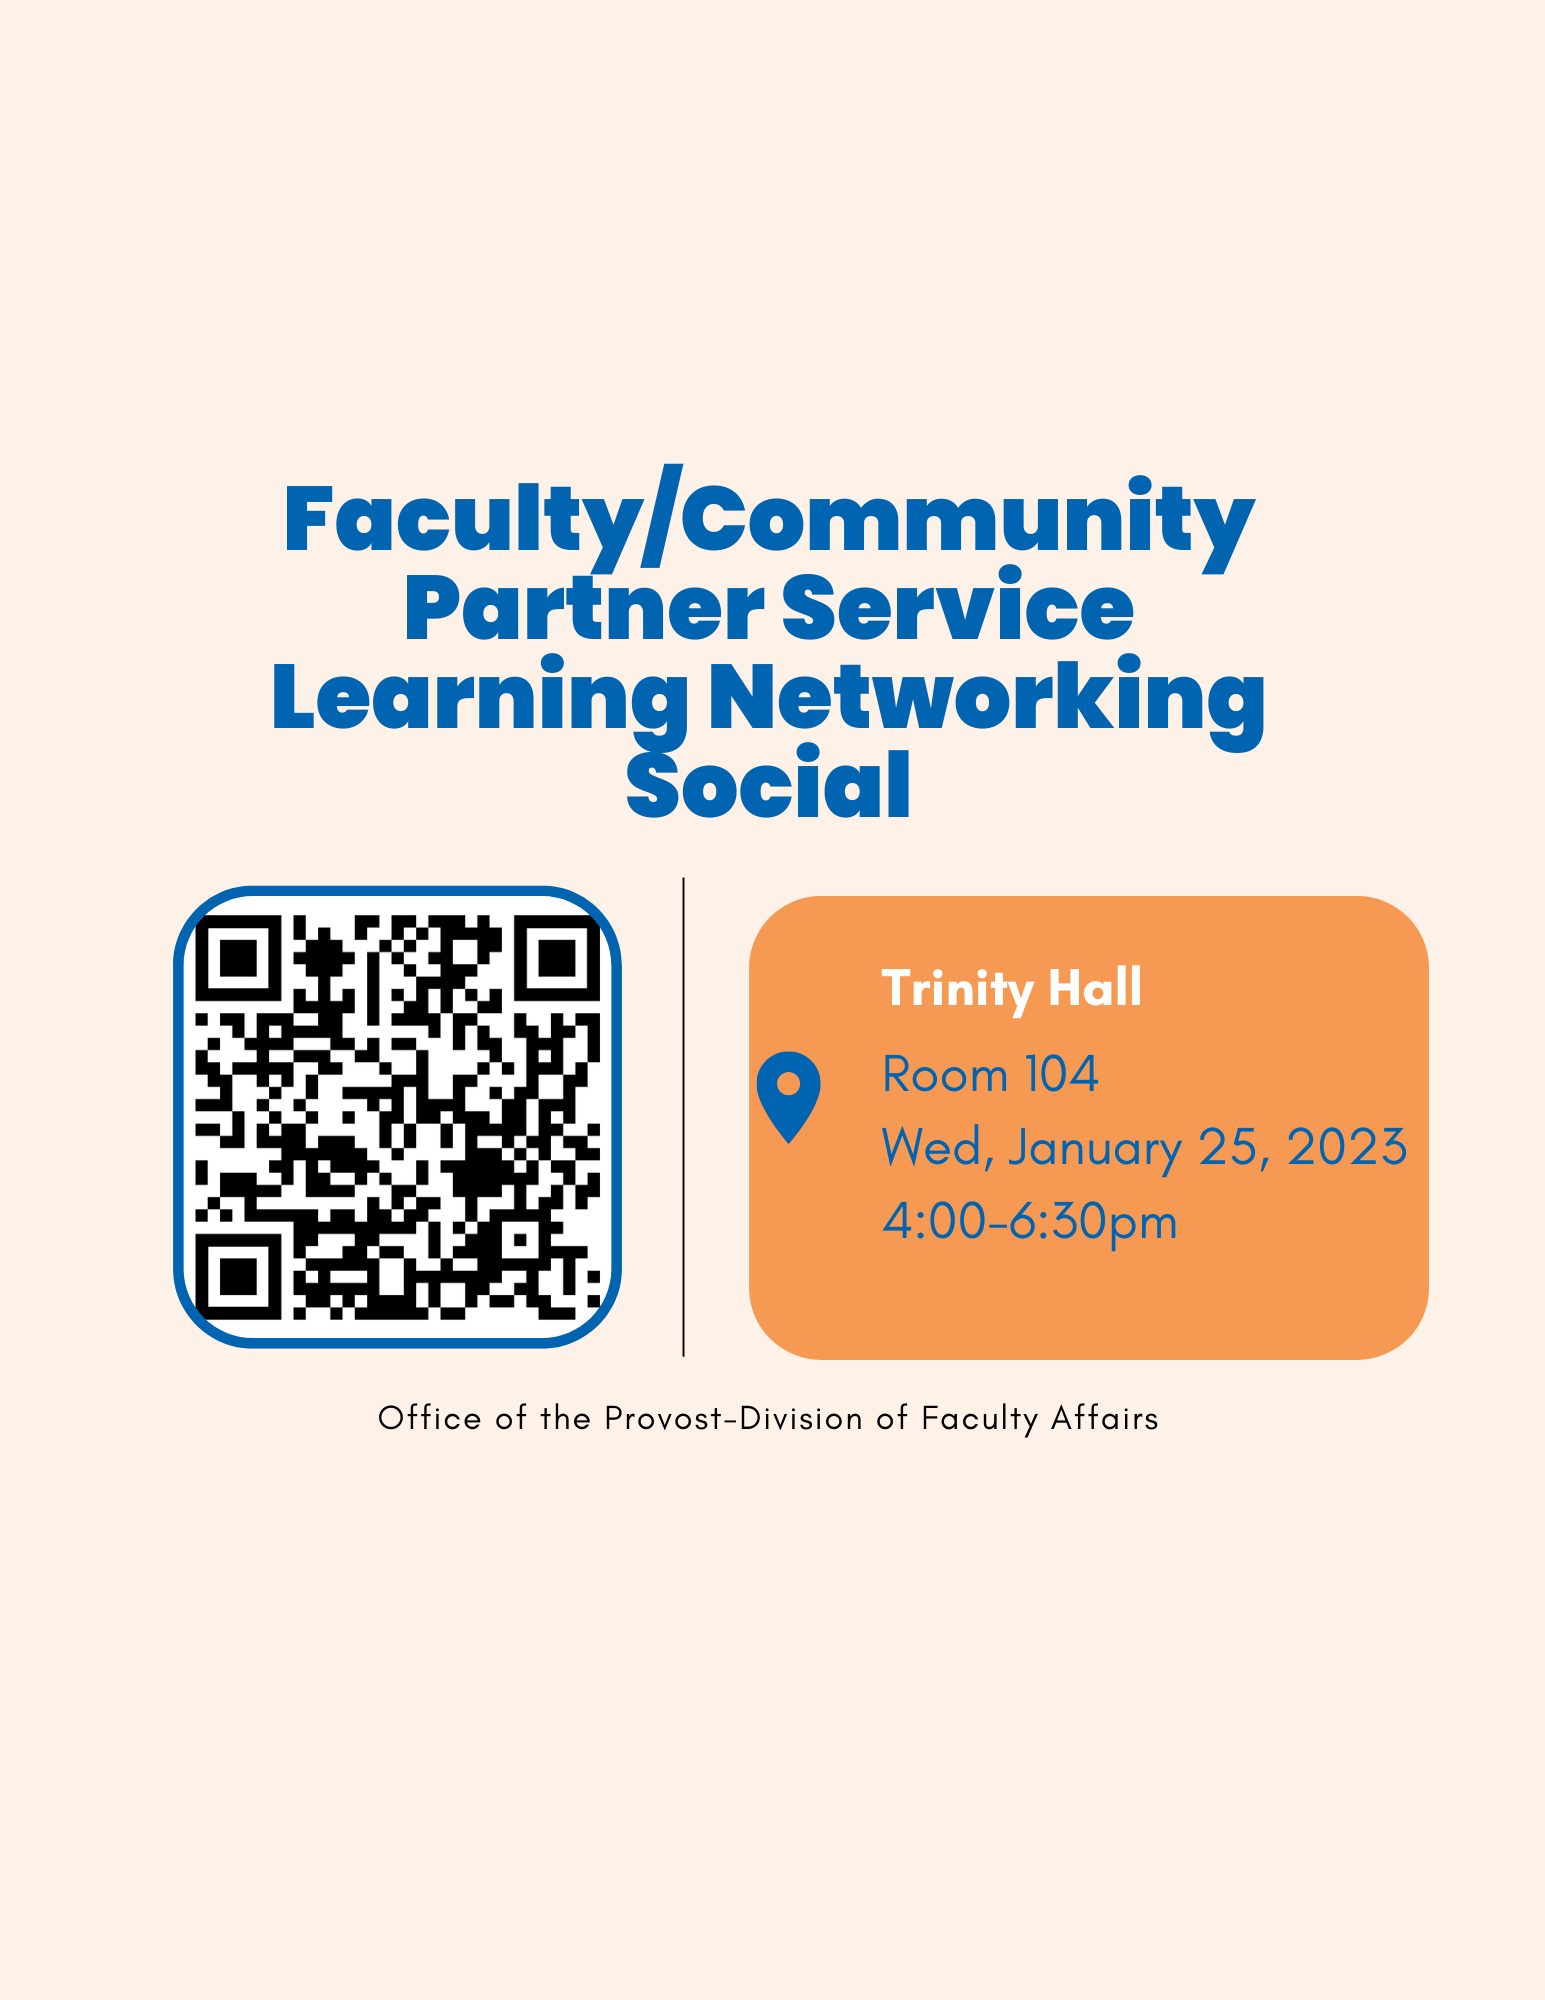 Faculty/Community Partner Service Learning Networking Social